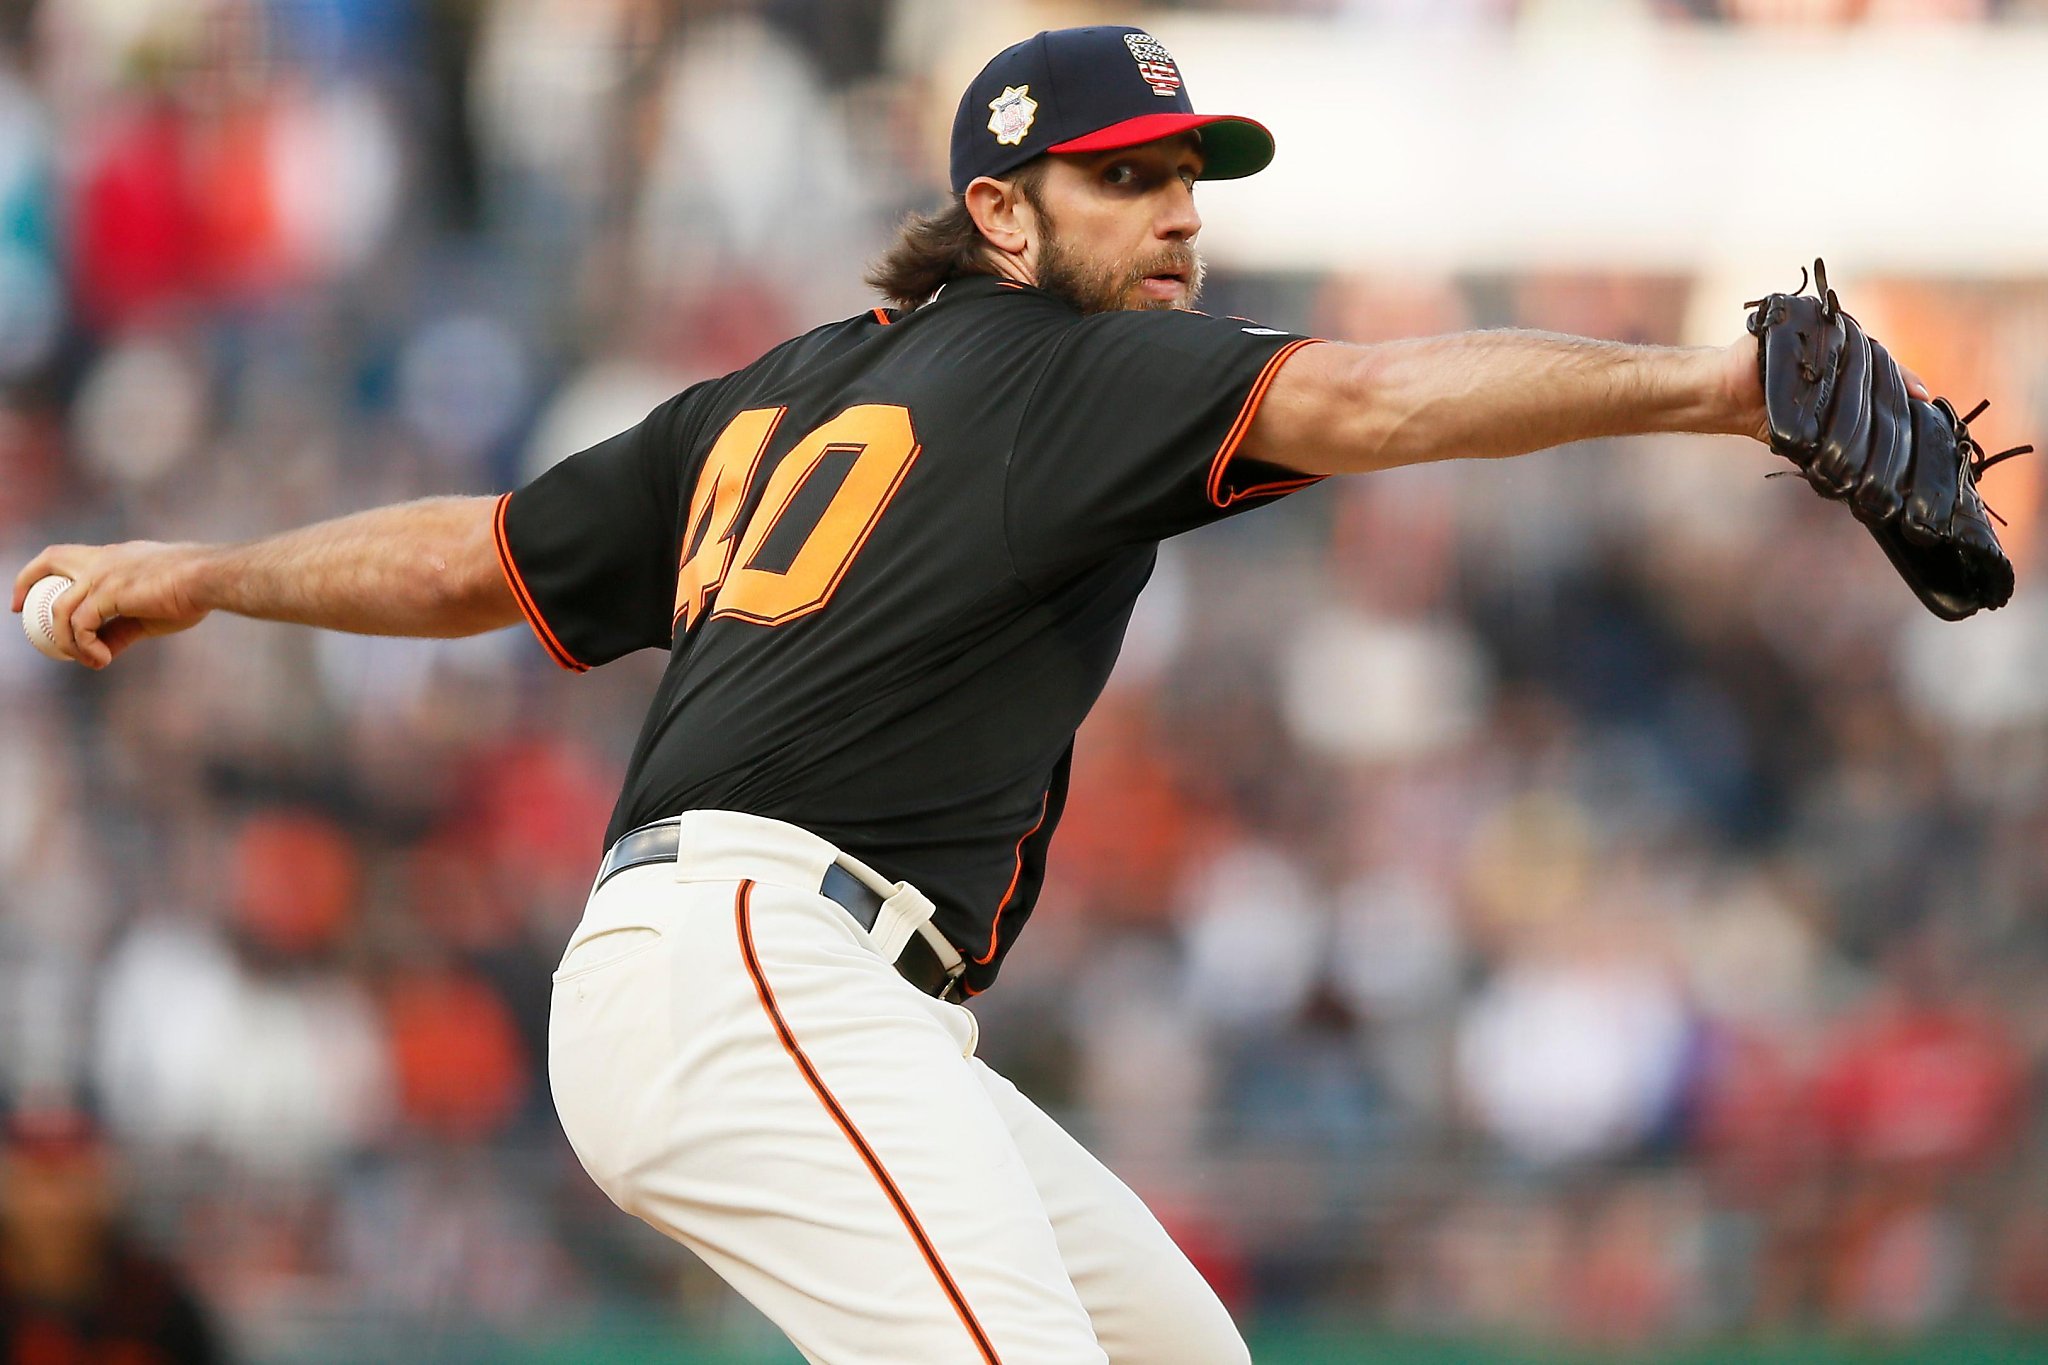 Madison Bumgarner set to pitch again in SF — this time with fans on hand